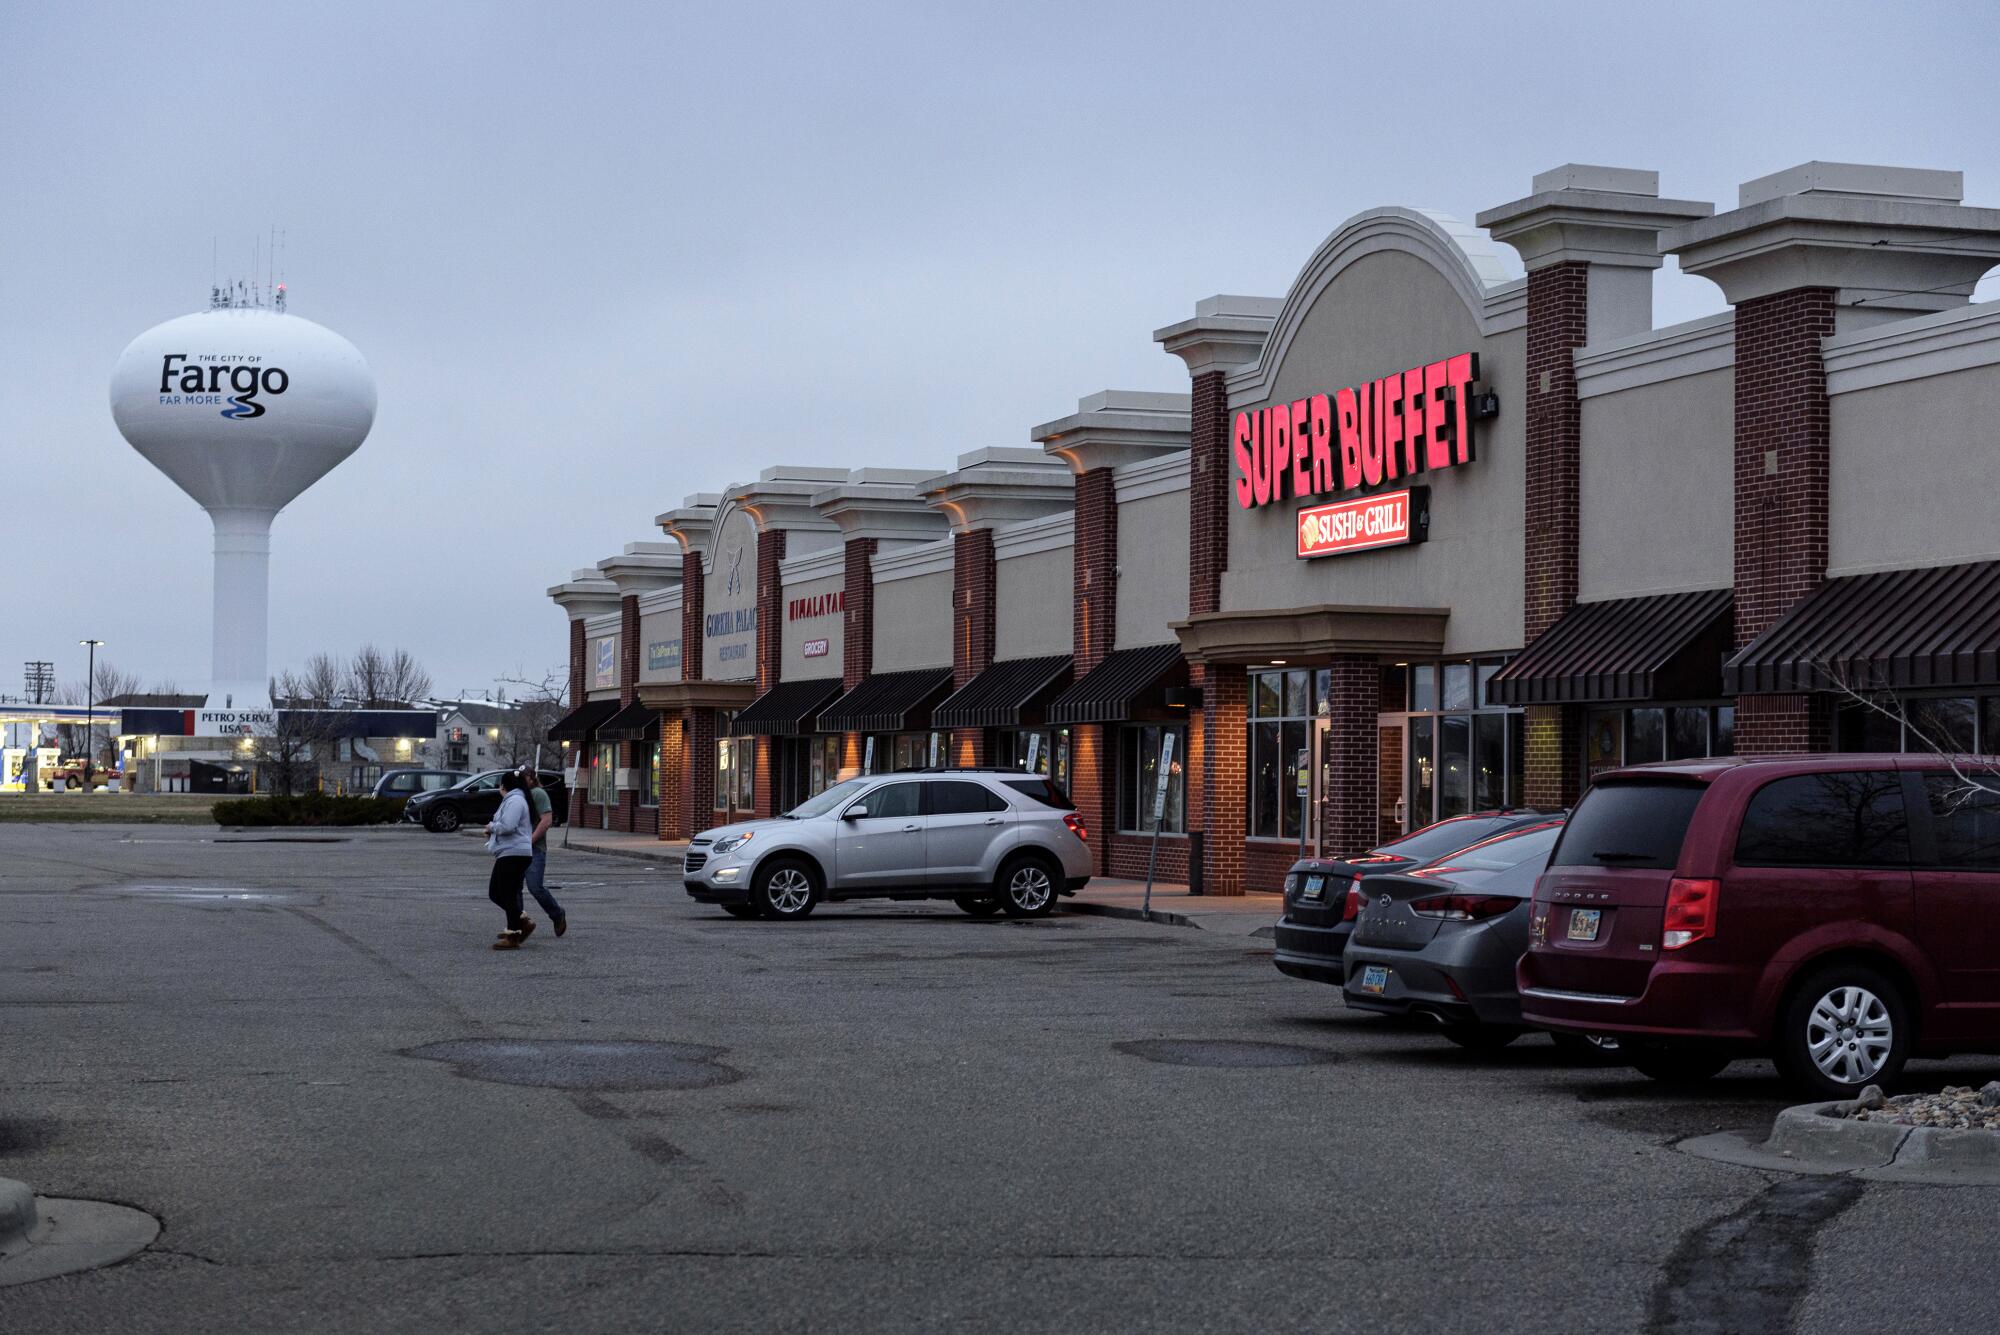 A water tower labeled Fargo is in the background of a strip mall with a restaurant called Super Buffet